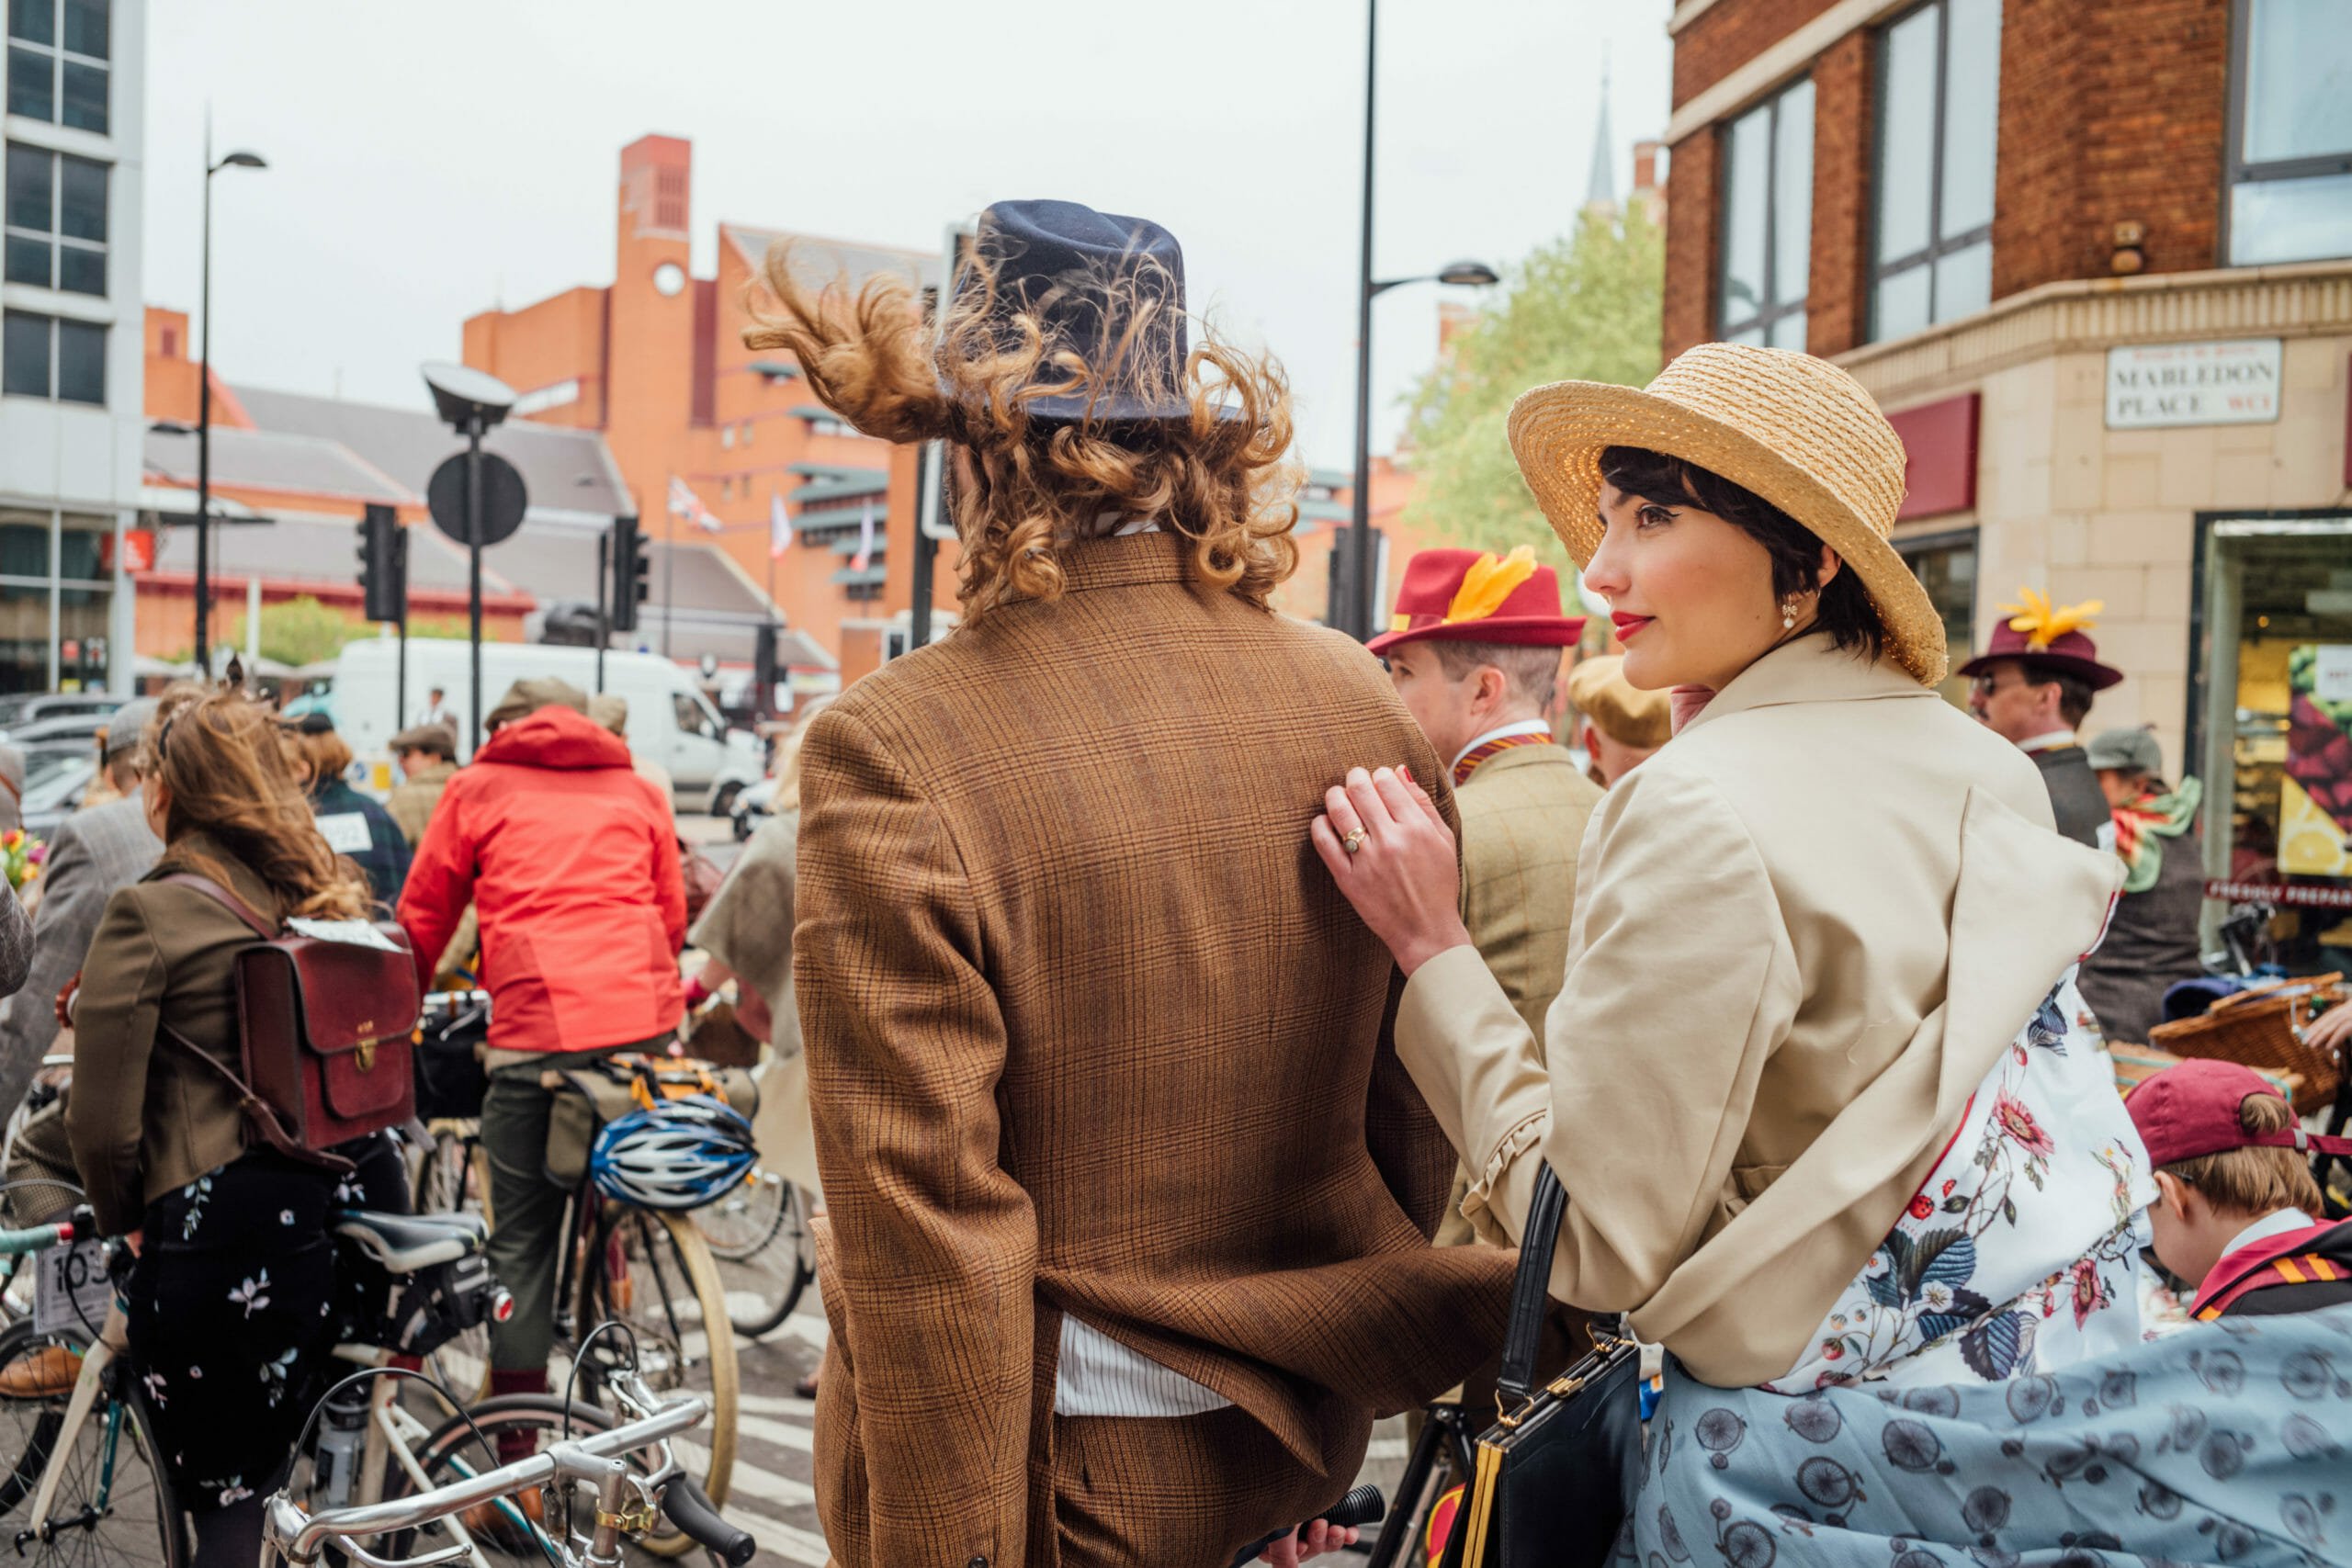 The Tweed Run An impeccably welldressed jaunt around the capital